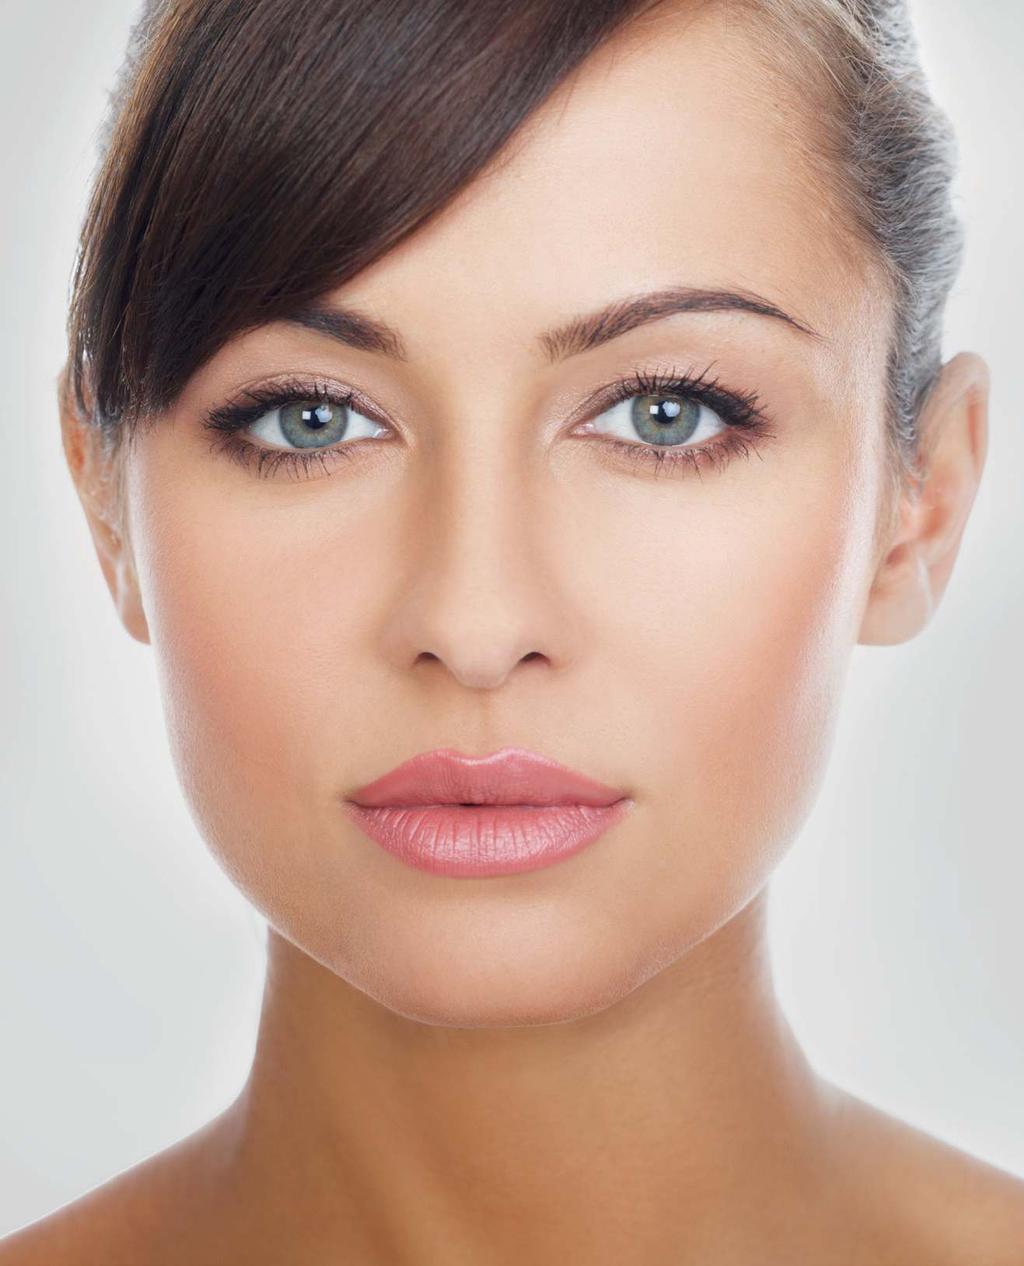 EXPERT BEAUTY GUIDE FROM LEADING BOARD-CERTIFIED FACIAL PLASTIC SURGEON DR. EDWARD J.